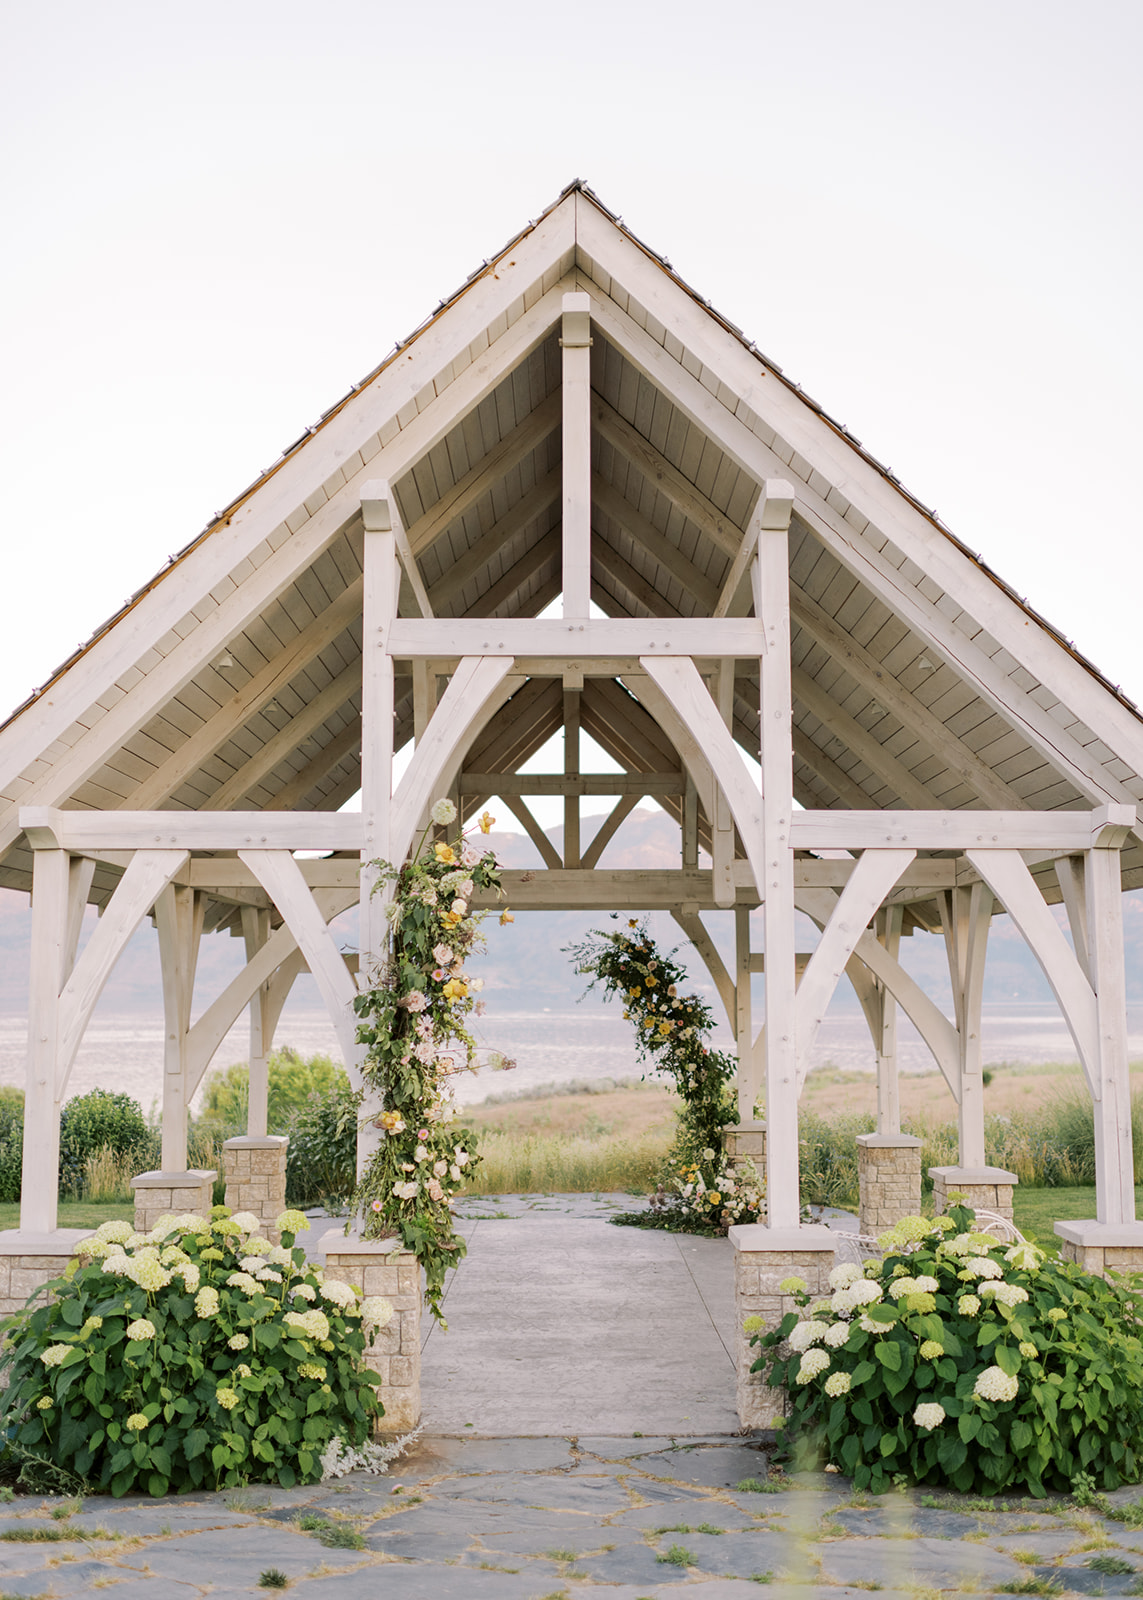 Golden-toned Florals and Black Tie Attire in this Sanctuary Gardens Styled Wedding Inspiration